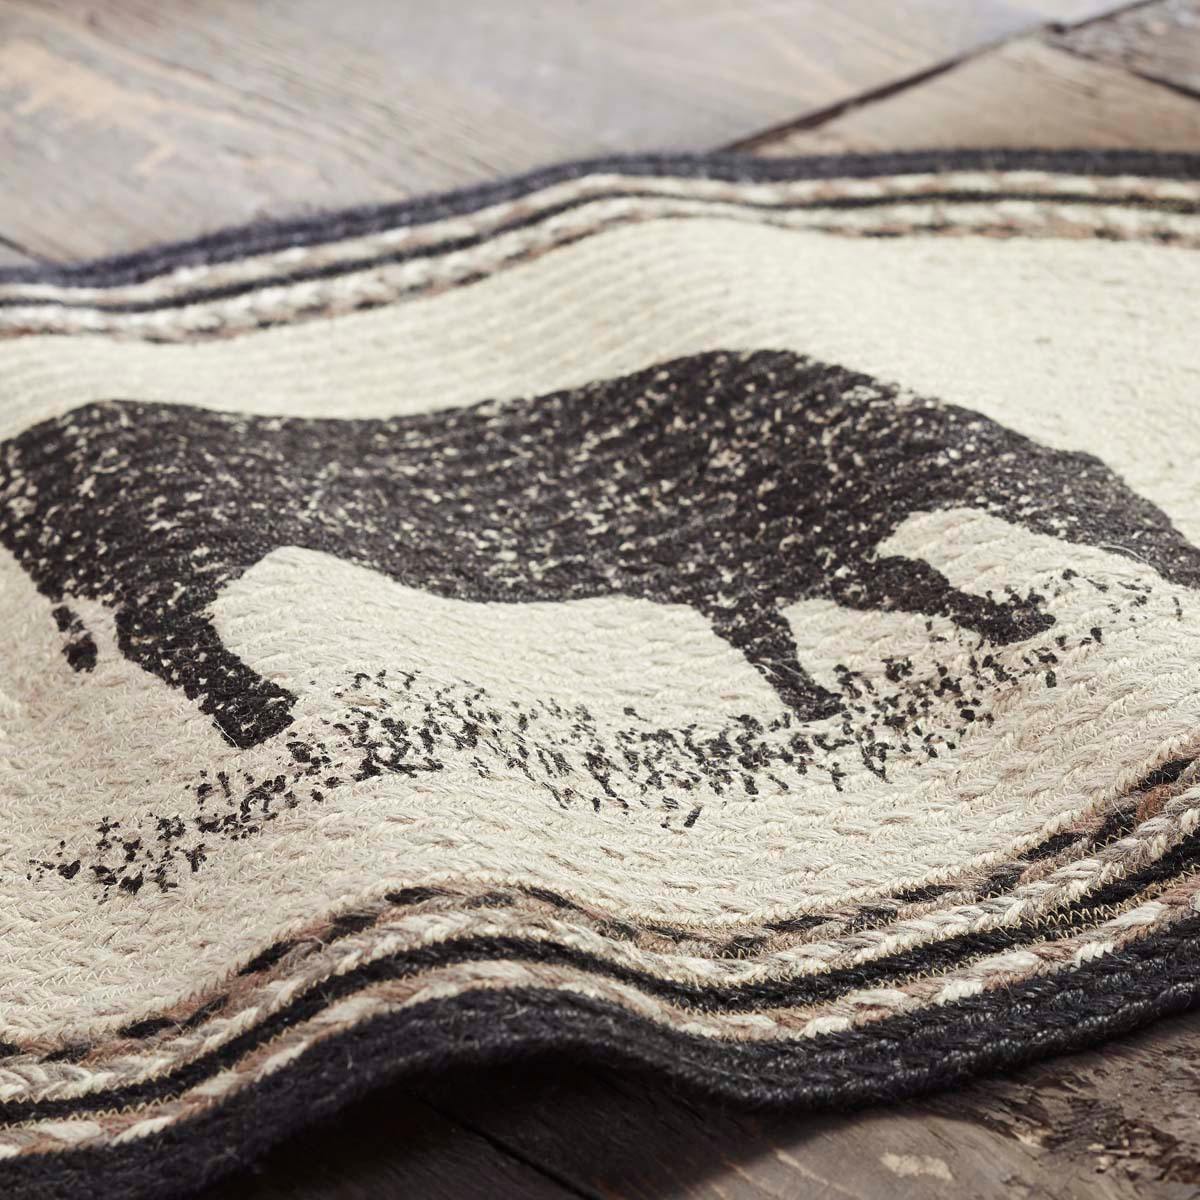 Sawyer Mill Charcoal Cow Jute Braided Rug Oval 20"x30" with Rug Pad VHC Brands - The Fox Decor